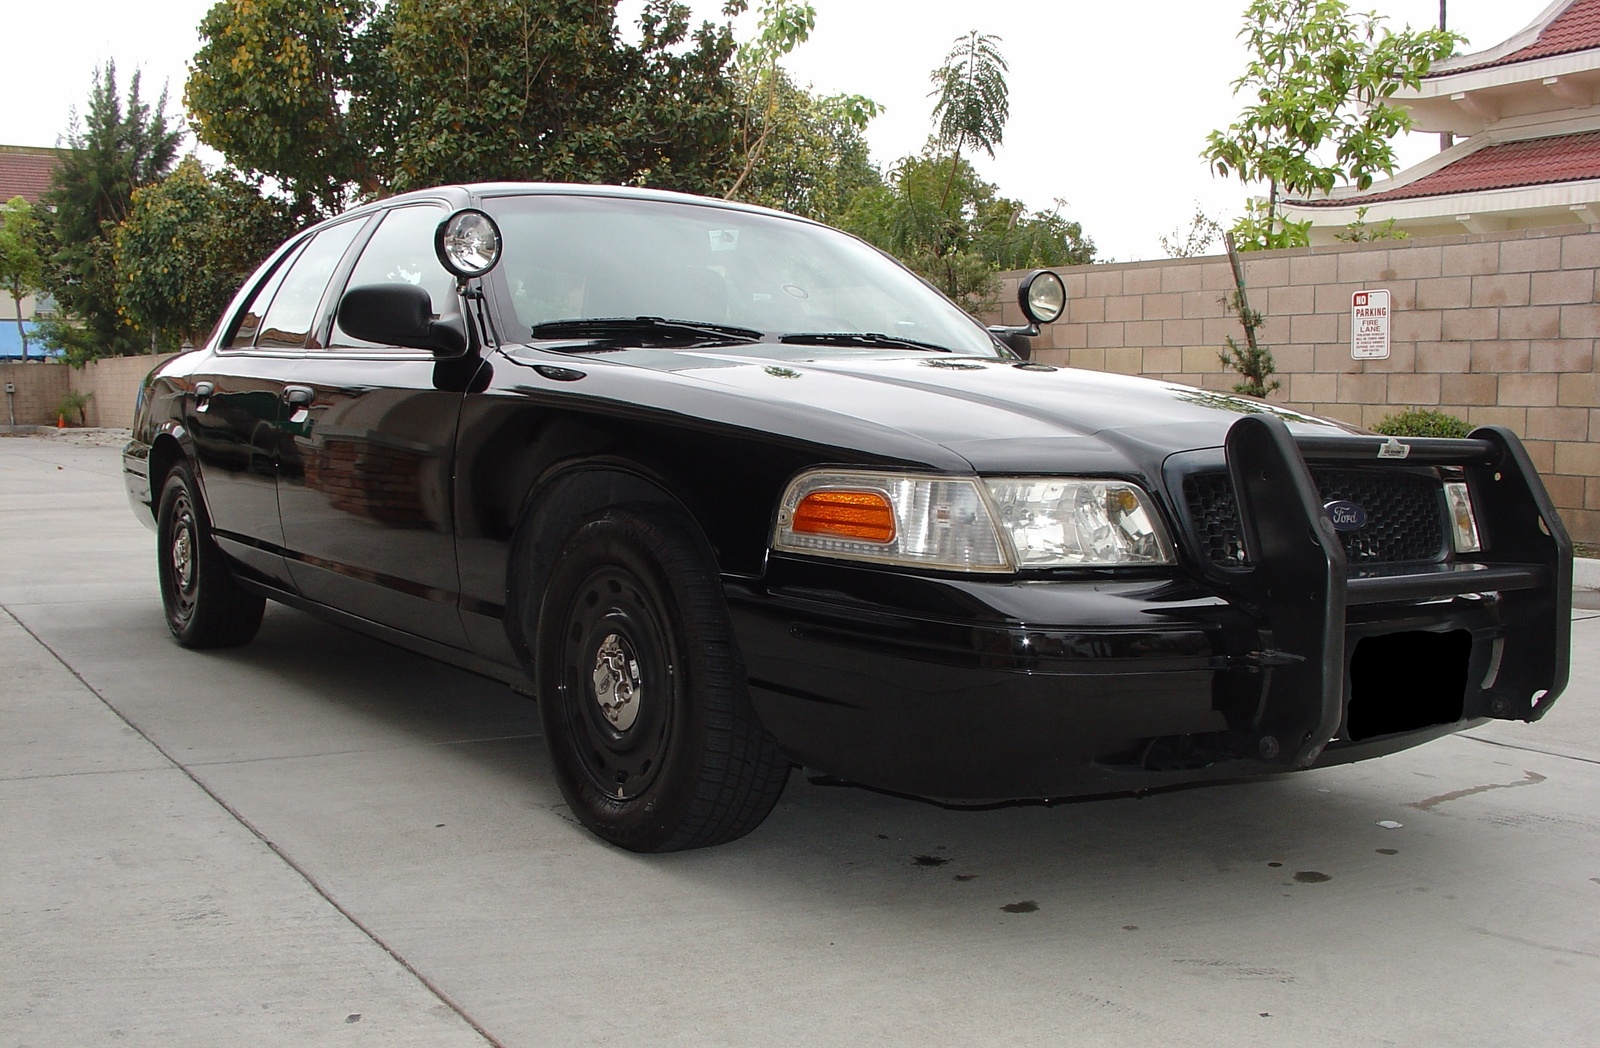 2003 Ford Crown Victoria - Pictures - CarGurus